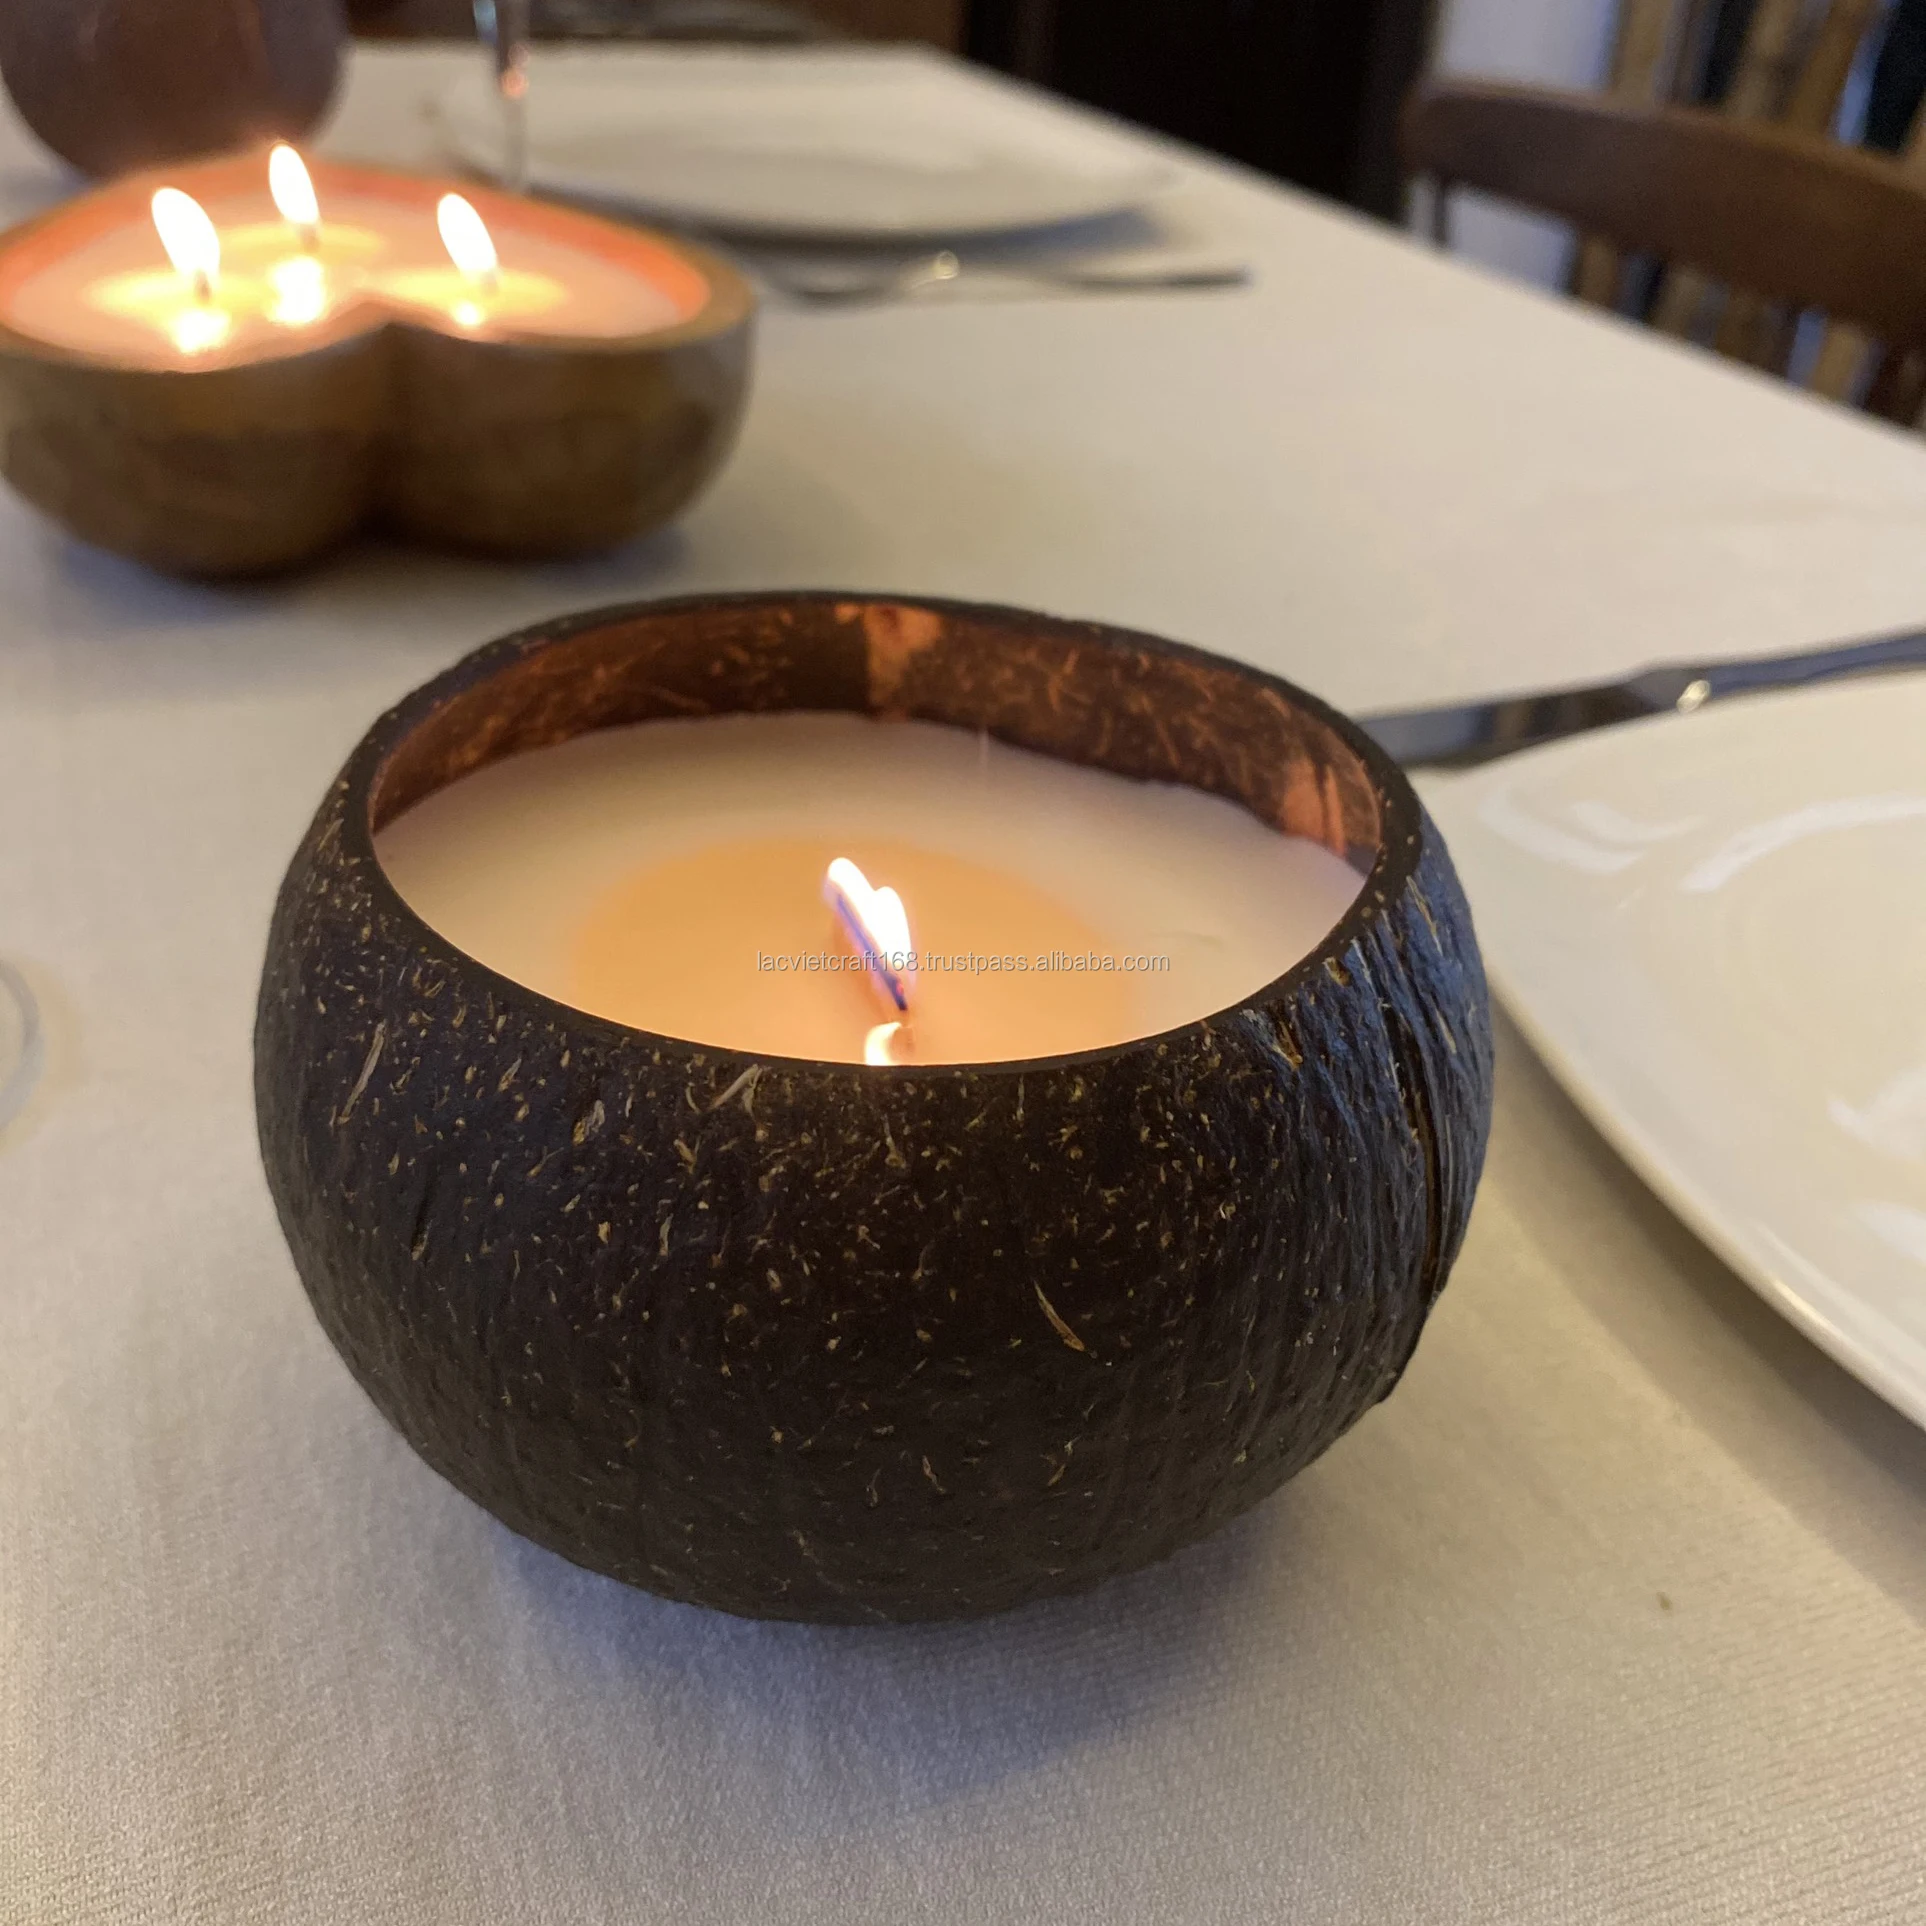 Details about   Coconut shell candle fragrance Thai Traditional Vintage local handmade 